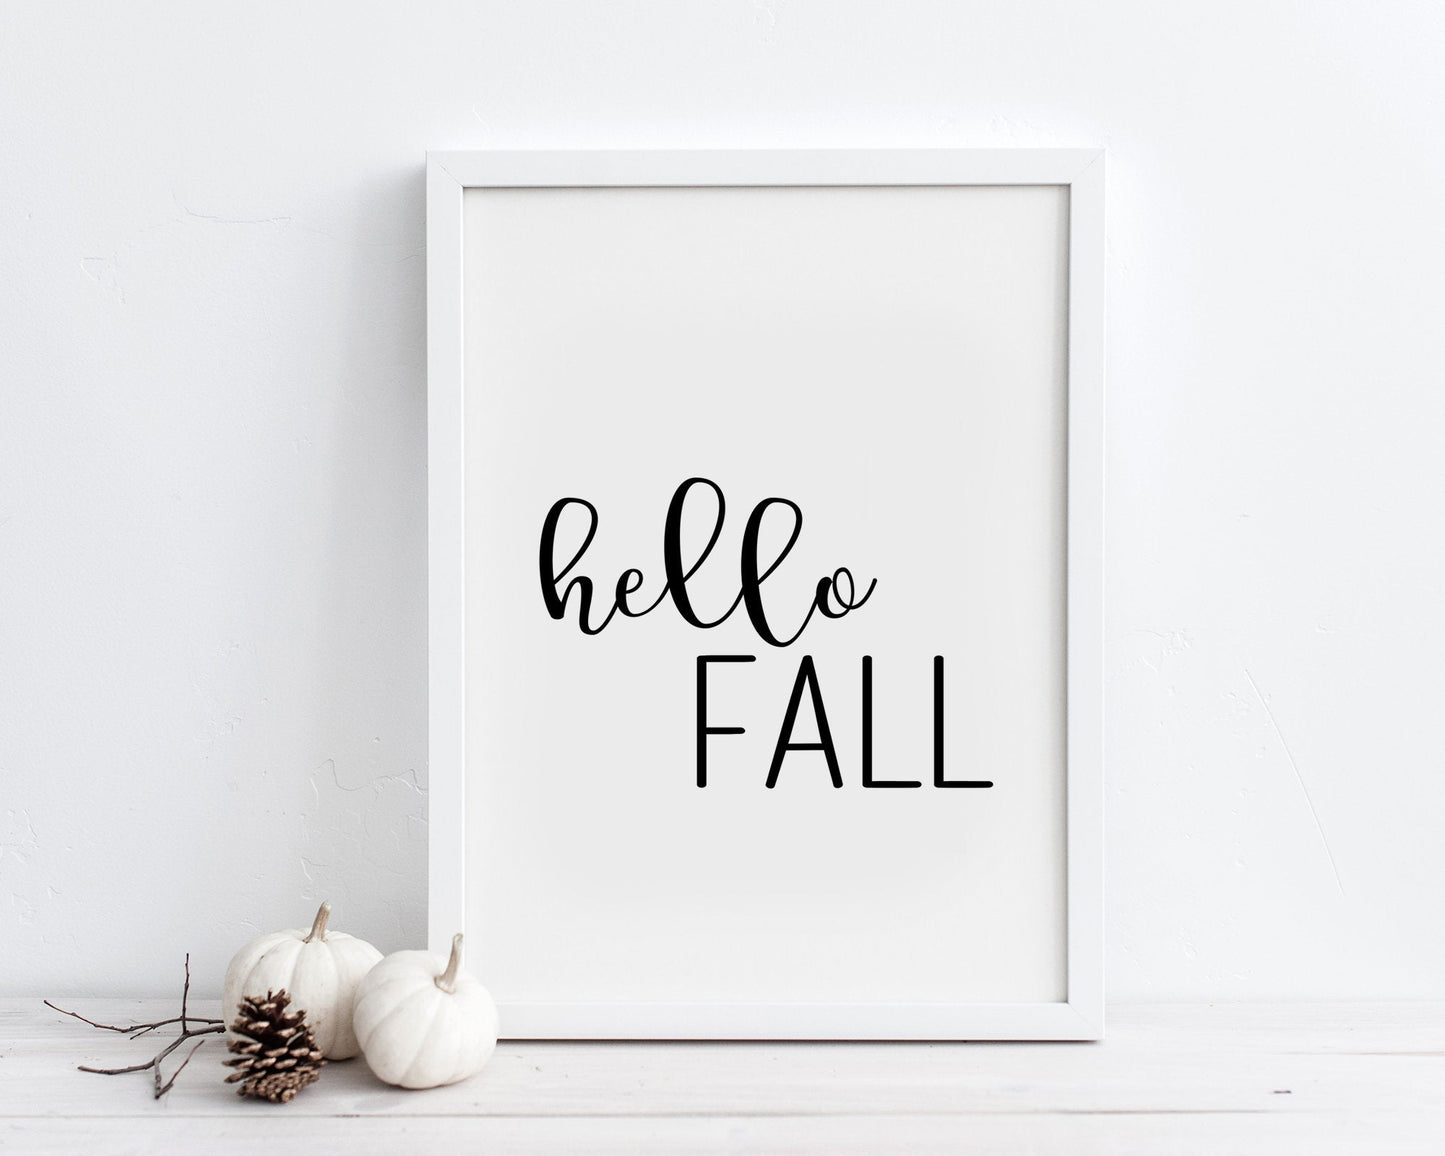 Hello Fall Printable Wall Art, Black and White Fall Quote Digital Download